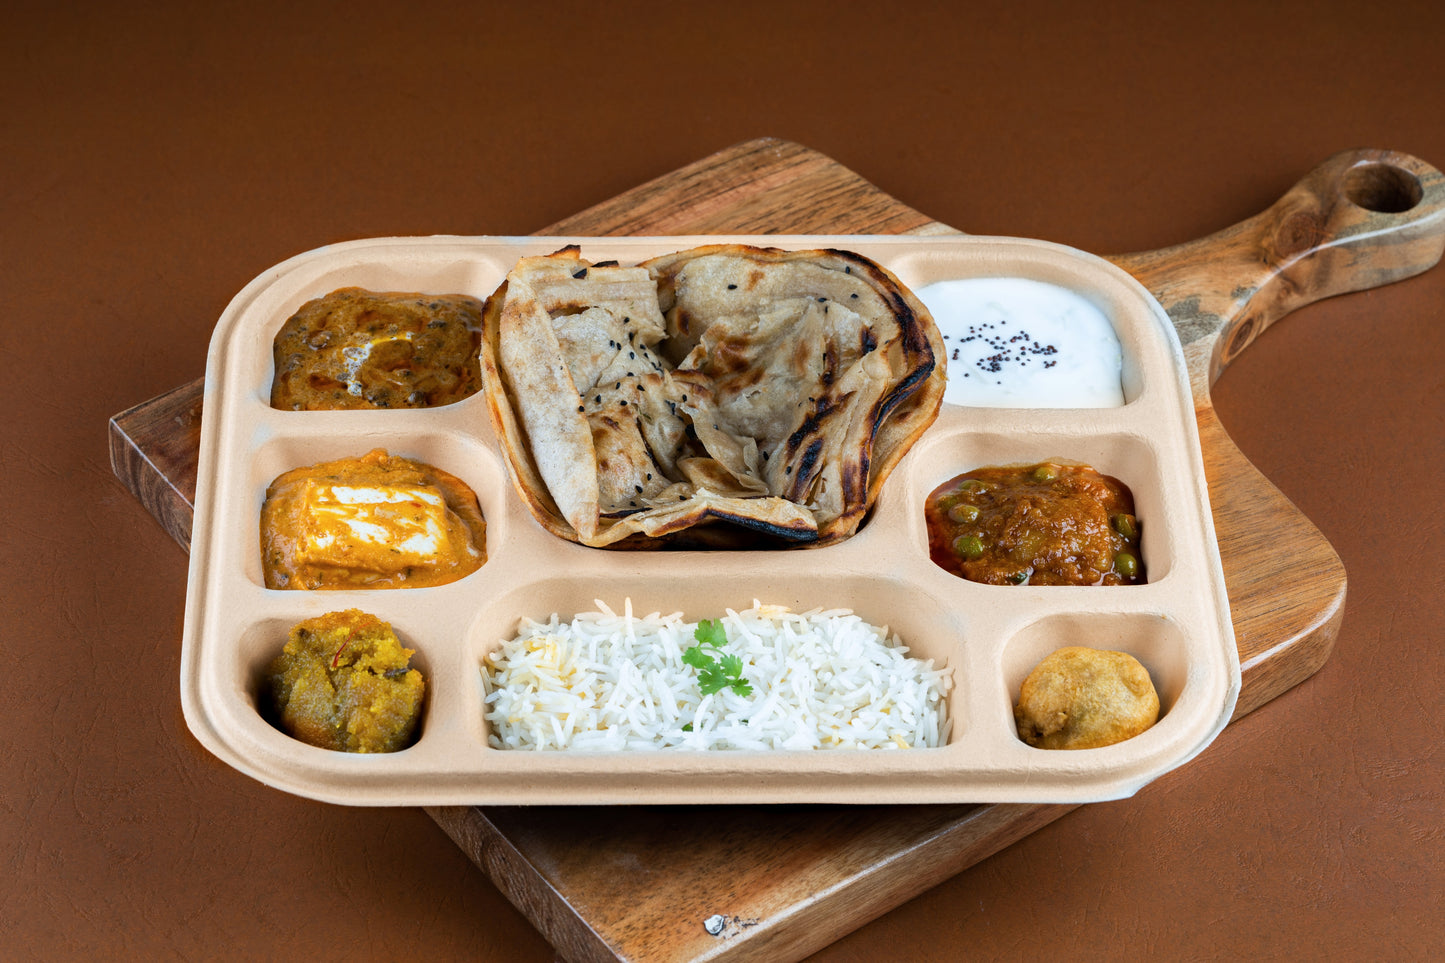 8 Compartment Meal Tray